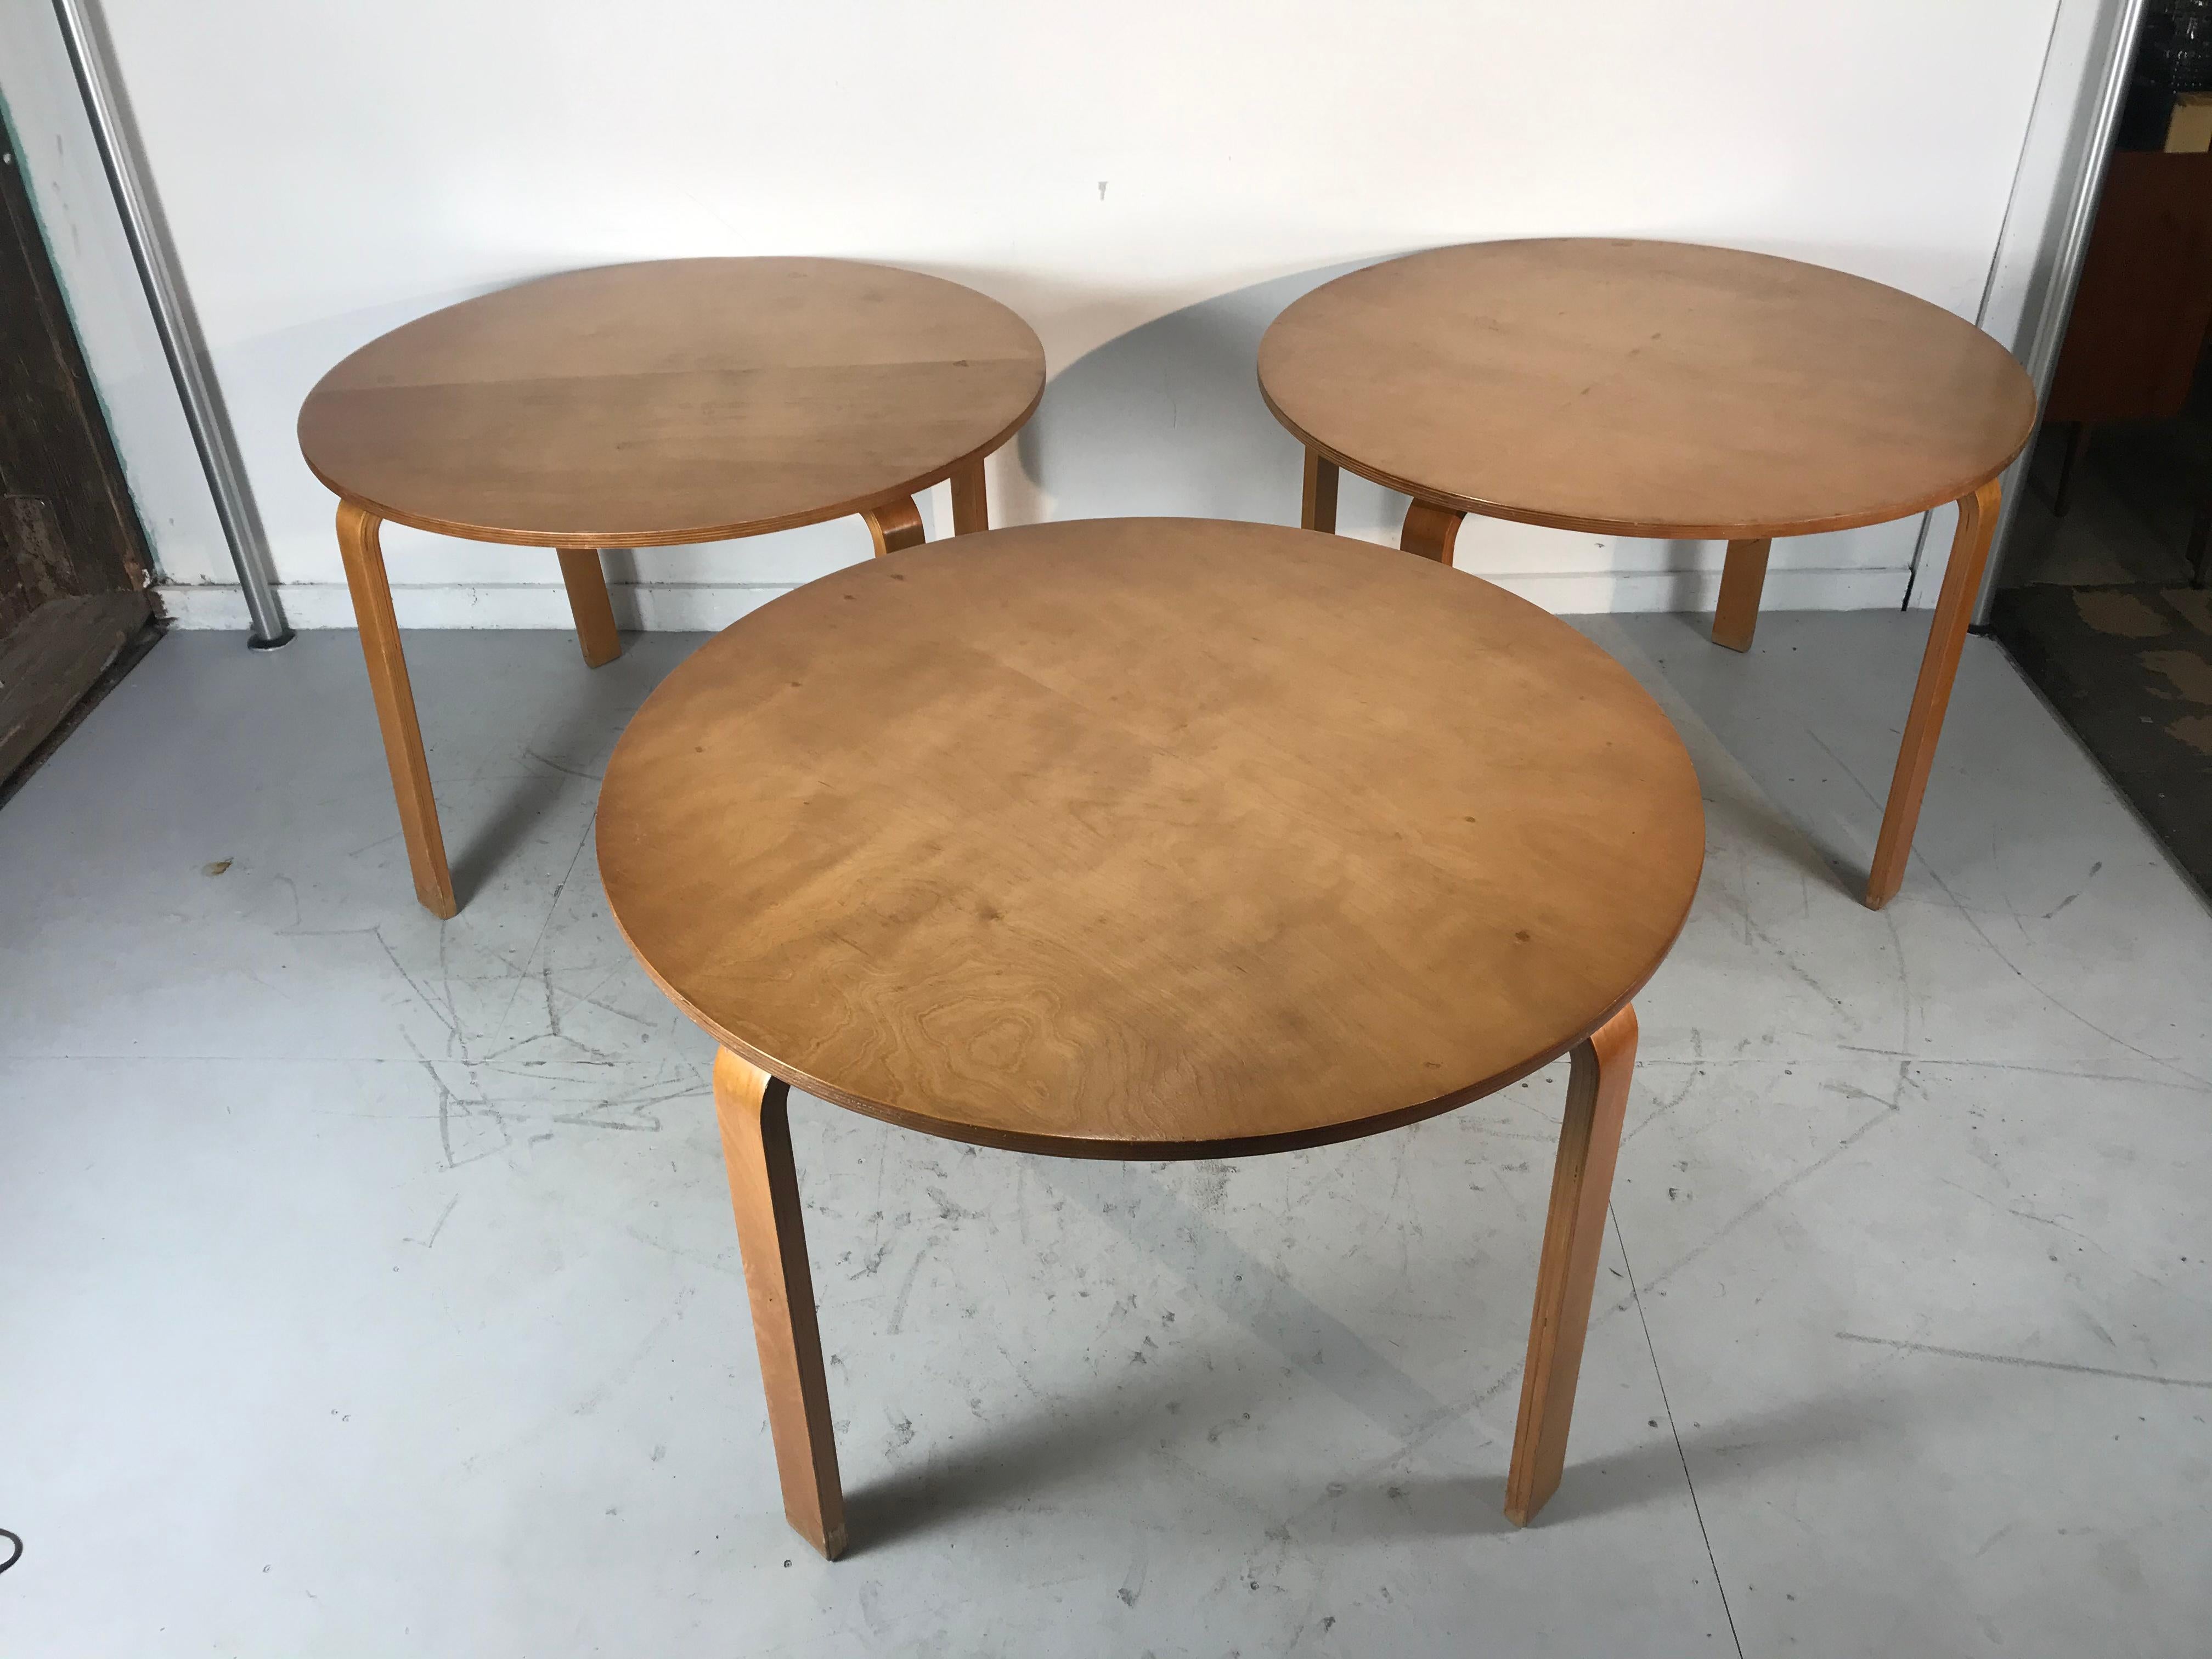 Classic bent plywood Bauhaus style dining tables attributed to Thonet, simple ,sleek design. All three tables retain original warm patina, nice original condition.